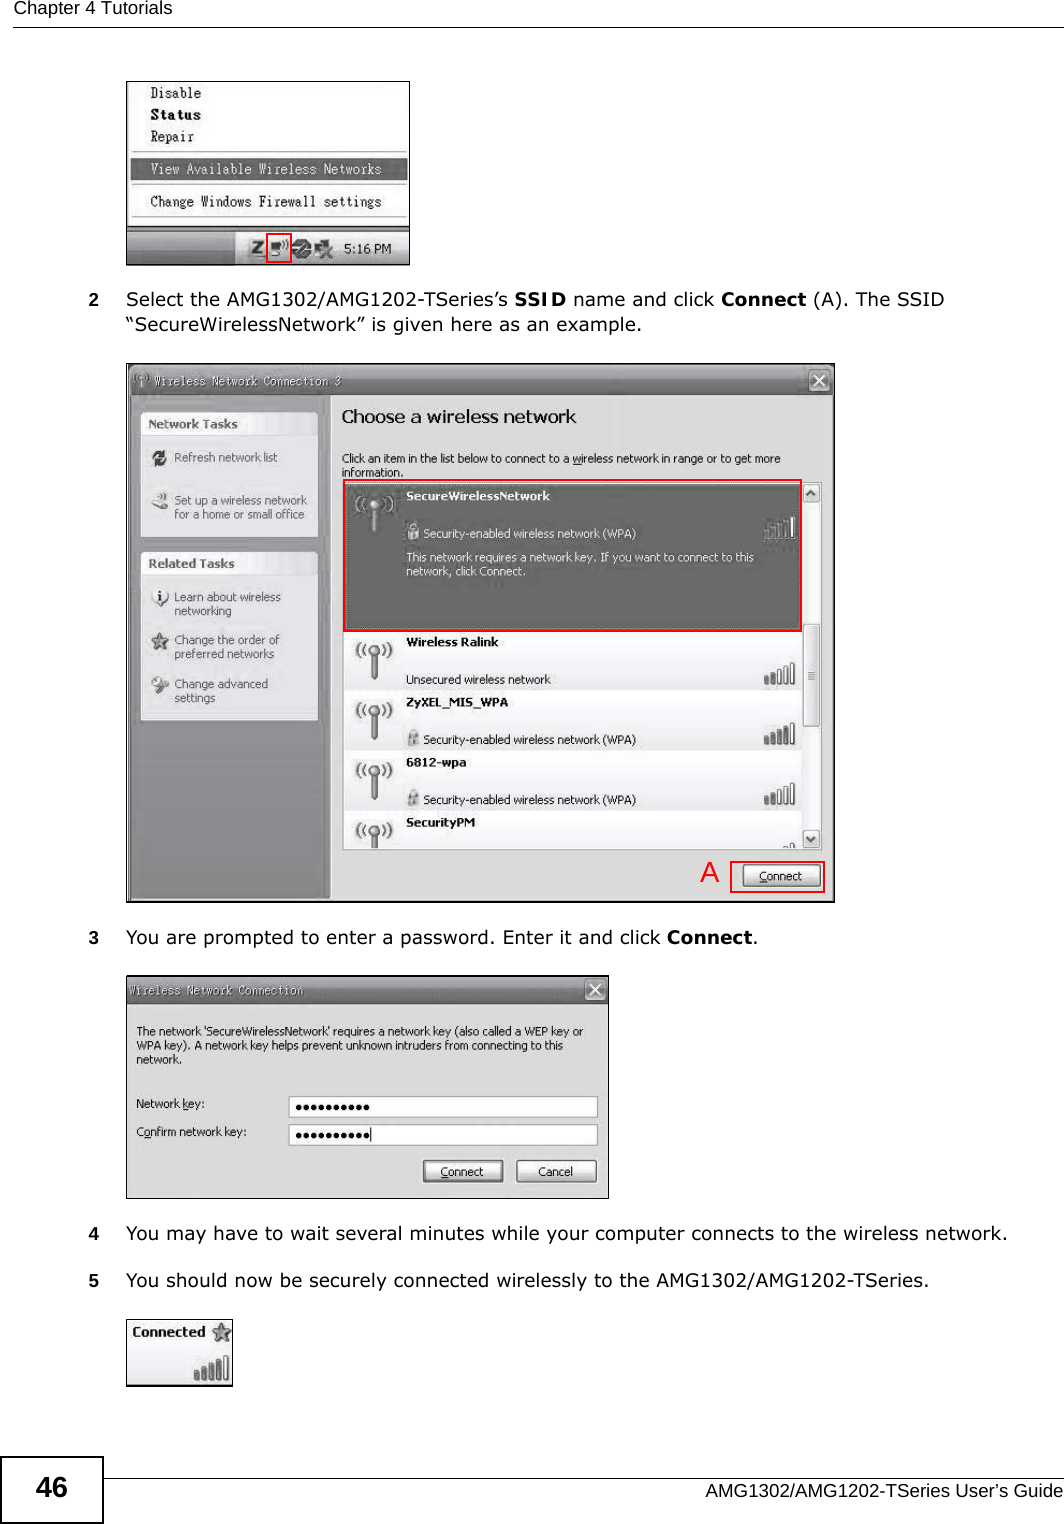 Chapter 4 TutorialsAMG1302/AMG1202-TSeries User’s Guide46Tutorial: Status2Select the AMG1302/AMG1202-TSeries’s SSID name and click Connect (A). The SSID “SecureWirelessNetwork” is given here as an example. Tutorial: Status3You are prompted to enter a password. Enter it and click Connect. Tutorial: Status4You may have to wait several minutes while your computer connects to the wireless network.5You should now be securely connected wirelessly to the AMG1302/AMG1202-TSeries. Tutorial: StatusA